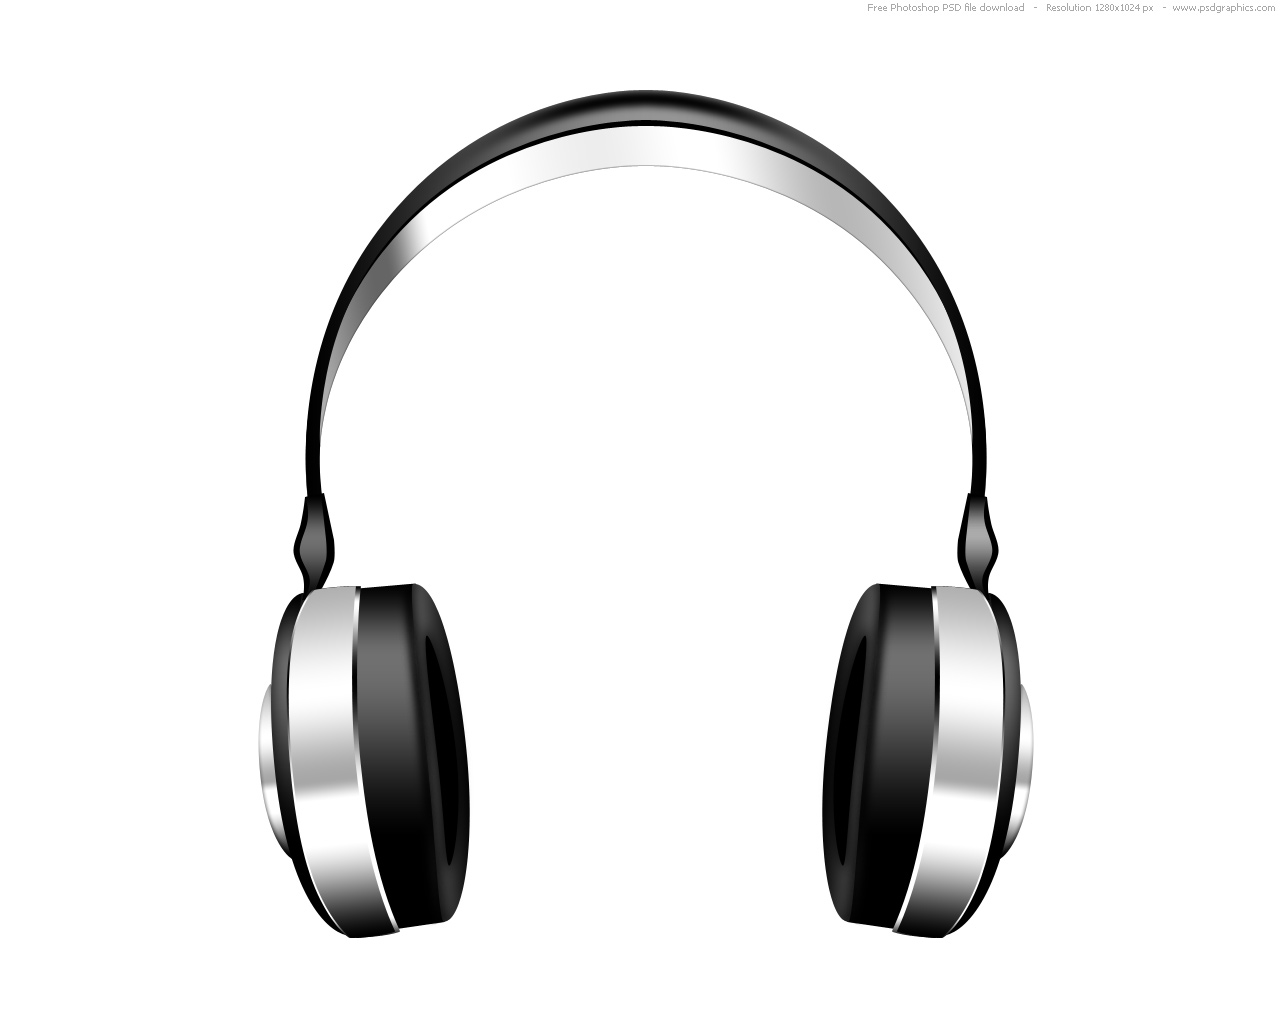 Picture Of Head Phones | Free Download Clip Art | Free Clip Art ...